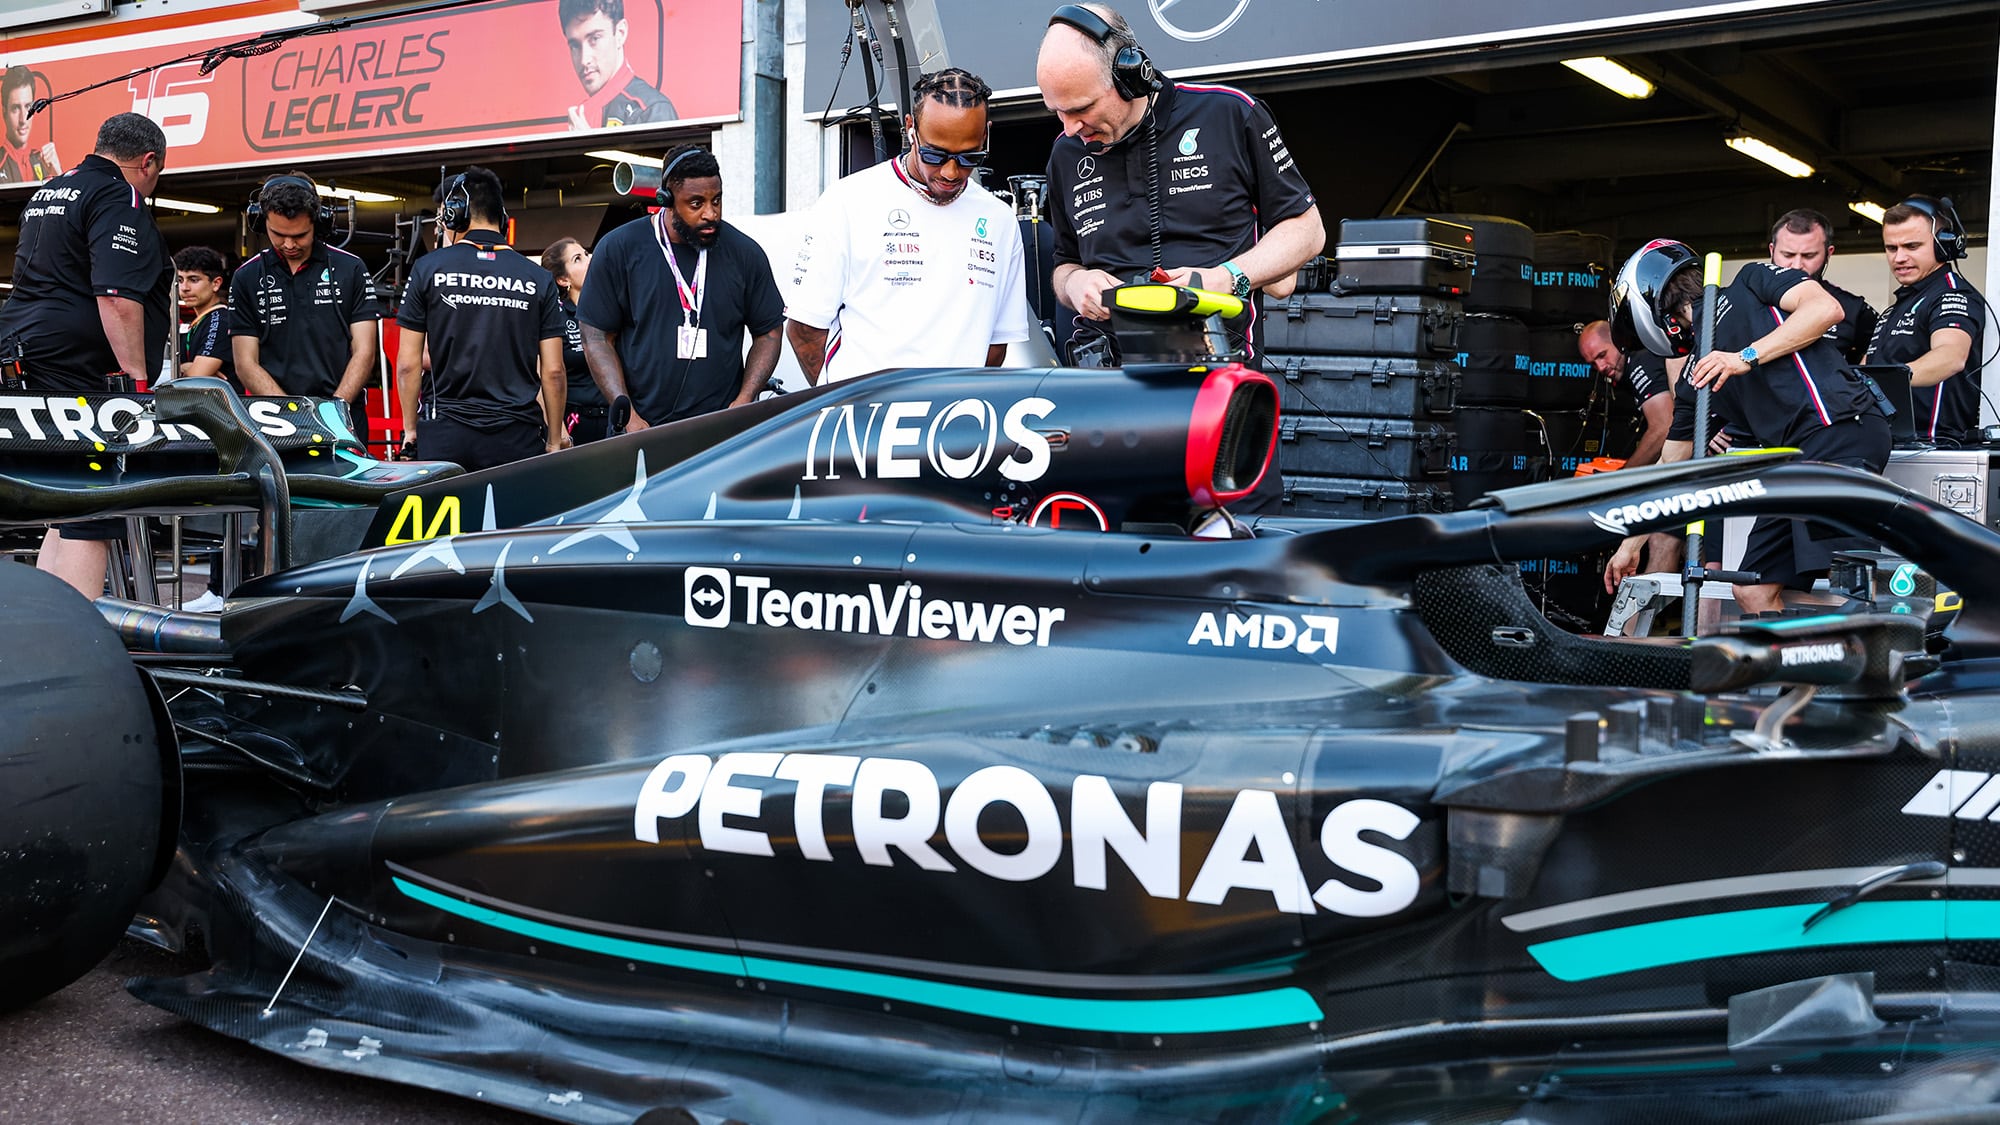 MPH: No radical gain from Mercedes F1 updates - but Hamilton will still stay